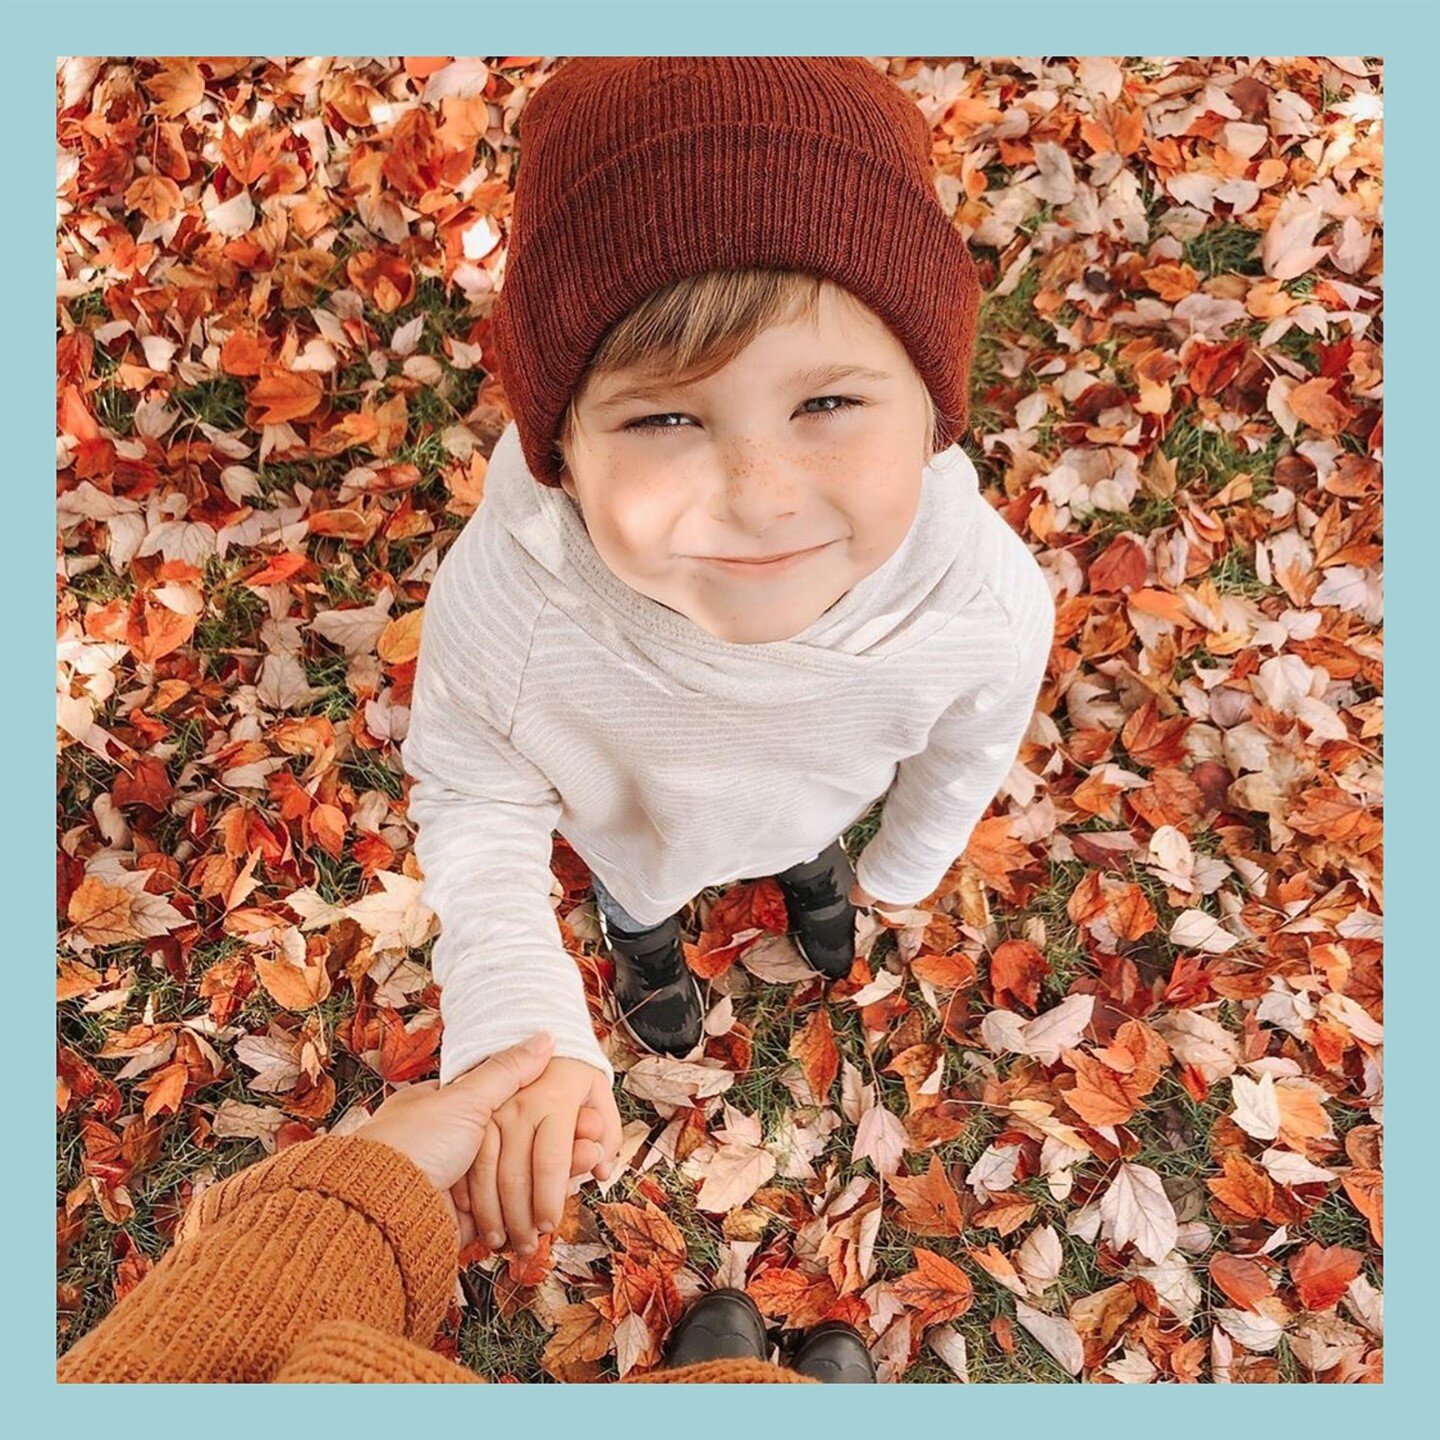 Things that comes with this season:
🍁 Crisp air, autumn breeze, falling leaves
🍁 The thick of the school year - homework help, tests, restless children!
🍁 Upcoming holidays that you need to prepare for - gifts, costumes, decorations
🍁 NEED FOR A 